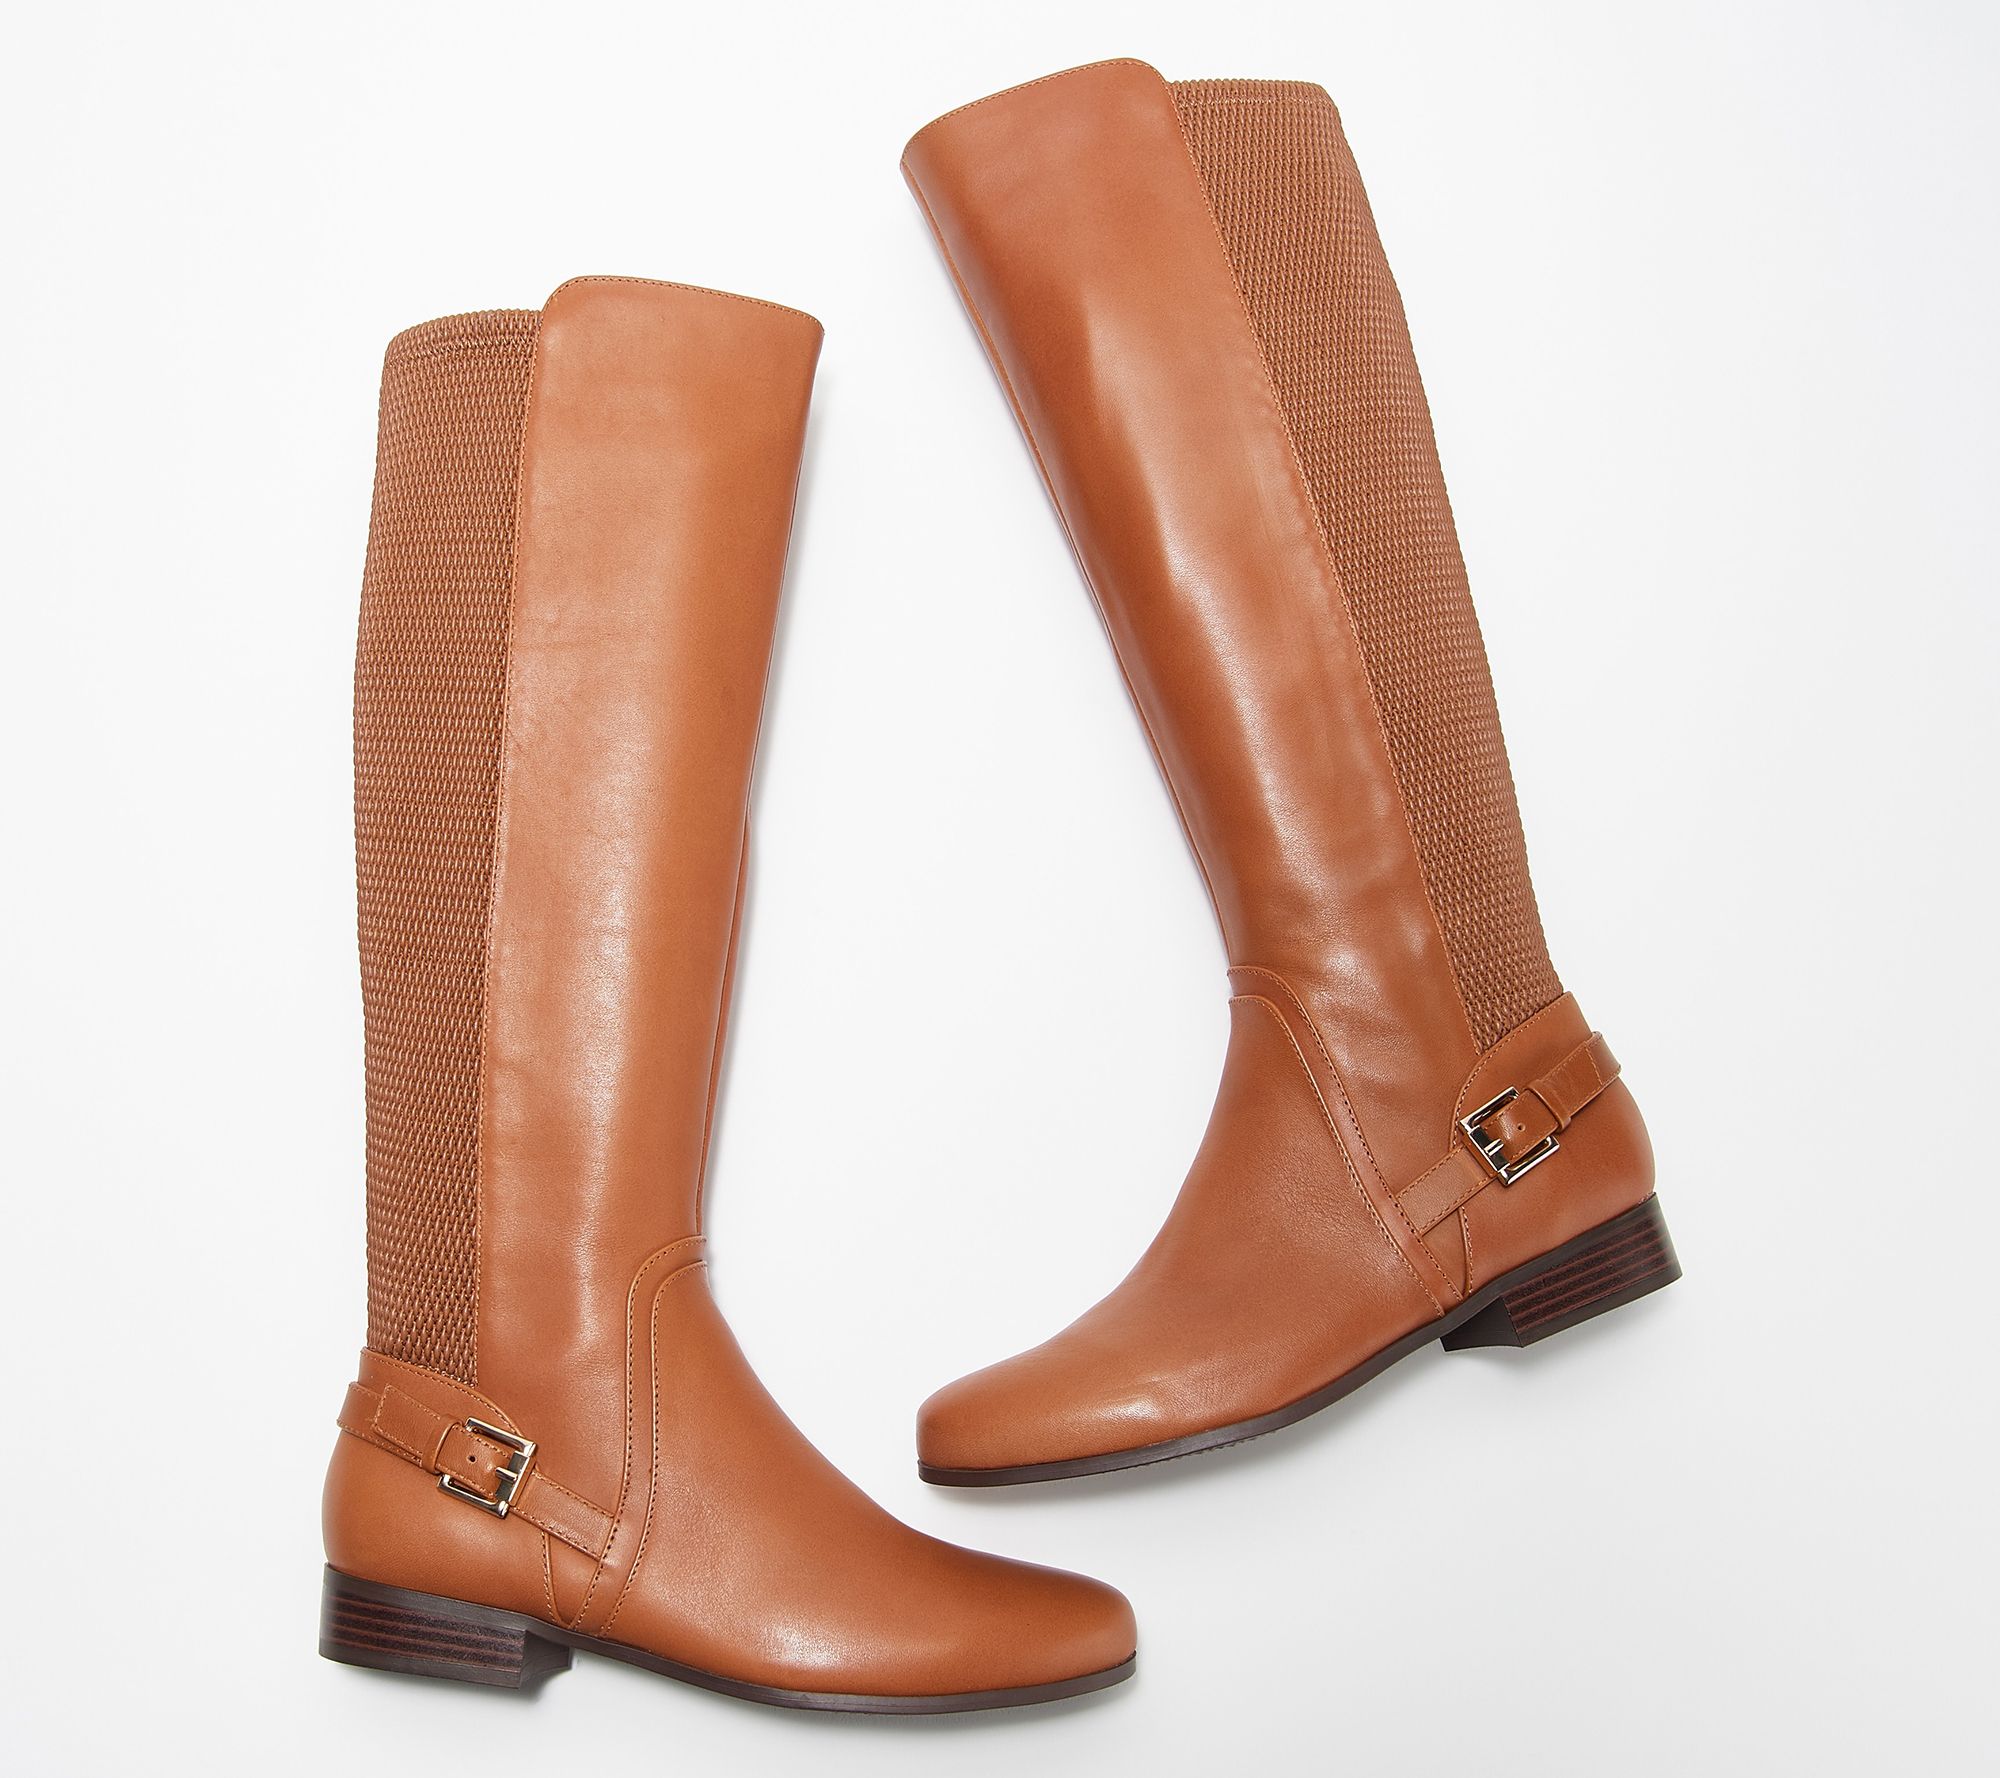 Isaac Mizrahi Live! Calf Leather and Stretch Riding Boot - QVC.com